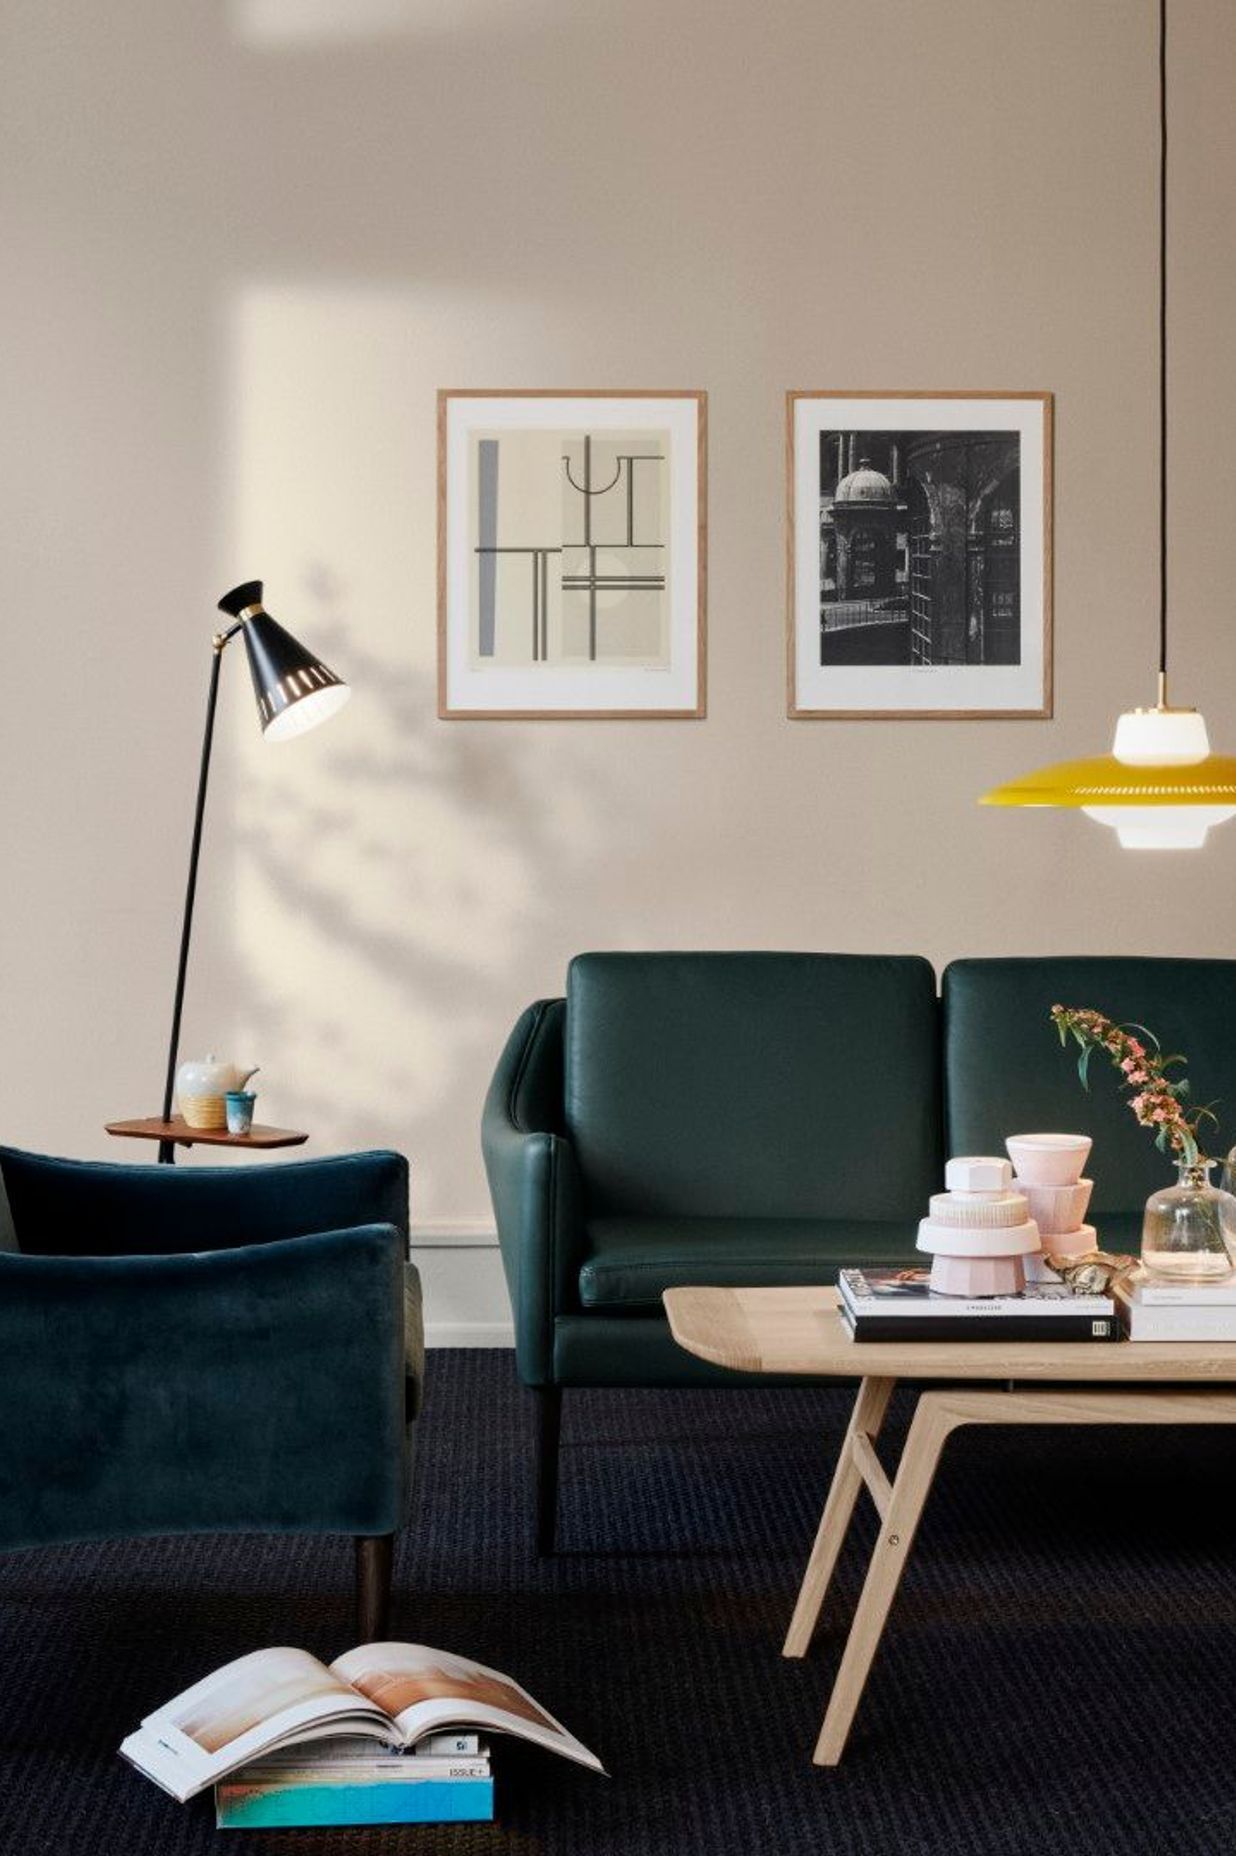 Warm Nordic Lamps offer an element of mid-century character with accent lighting pieces. These pieces utilise enduring design materials like opaline diffusers and saucer or cone shape shade forms. Image features the Cone Floor Lamp with Table and the Opal Shade Pendant.